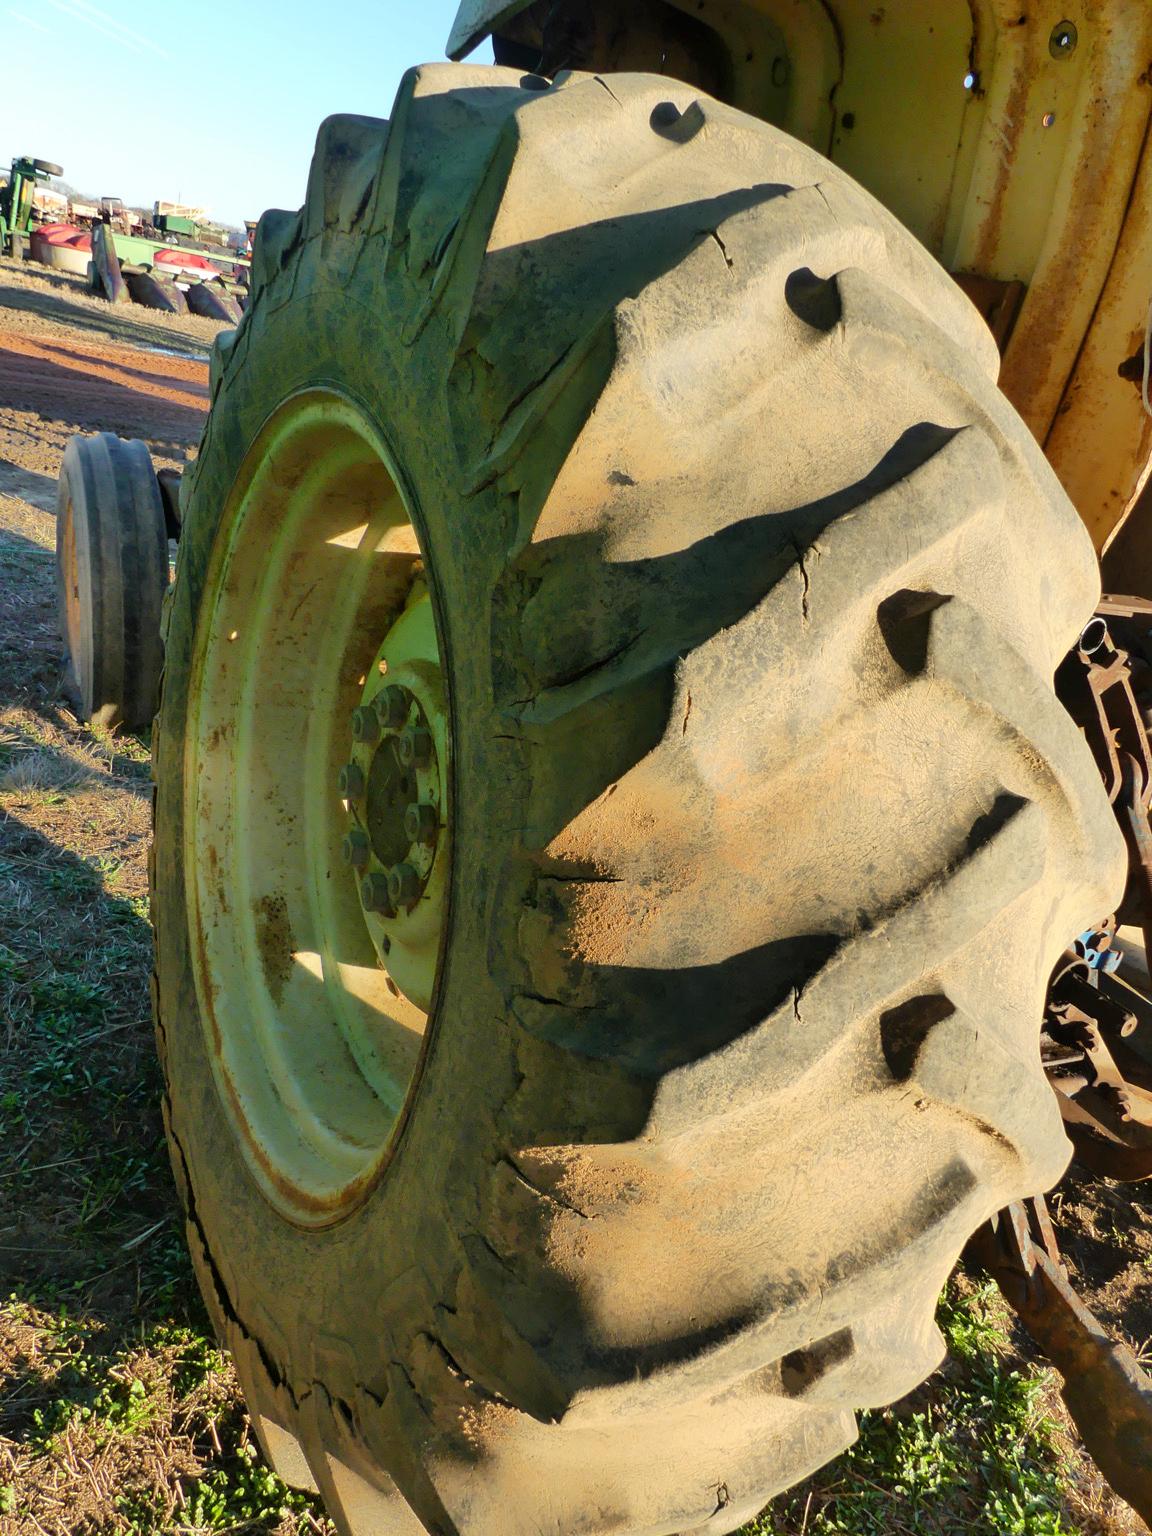 Ford 4610 Tractor: Meter Shows 4660 hrs